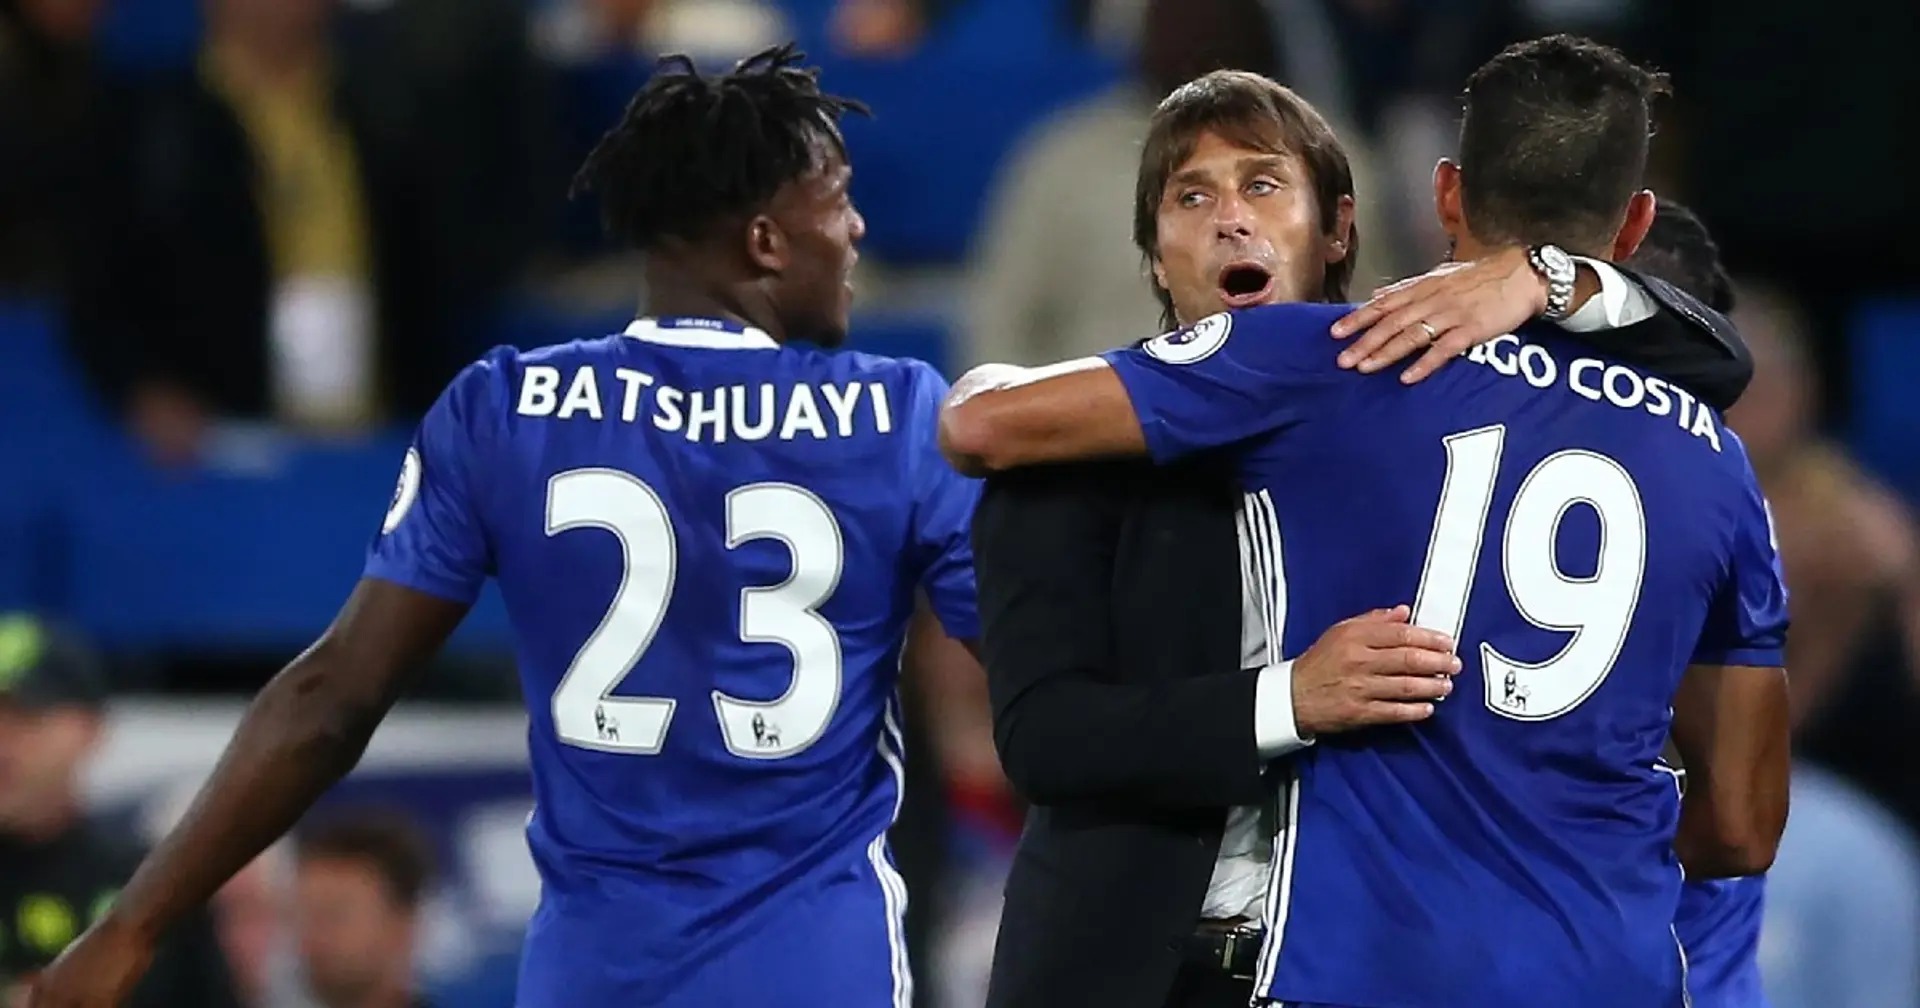 'The problem was Diego Costa': Batshuayi on not getting enough chances at Chelsea